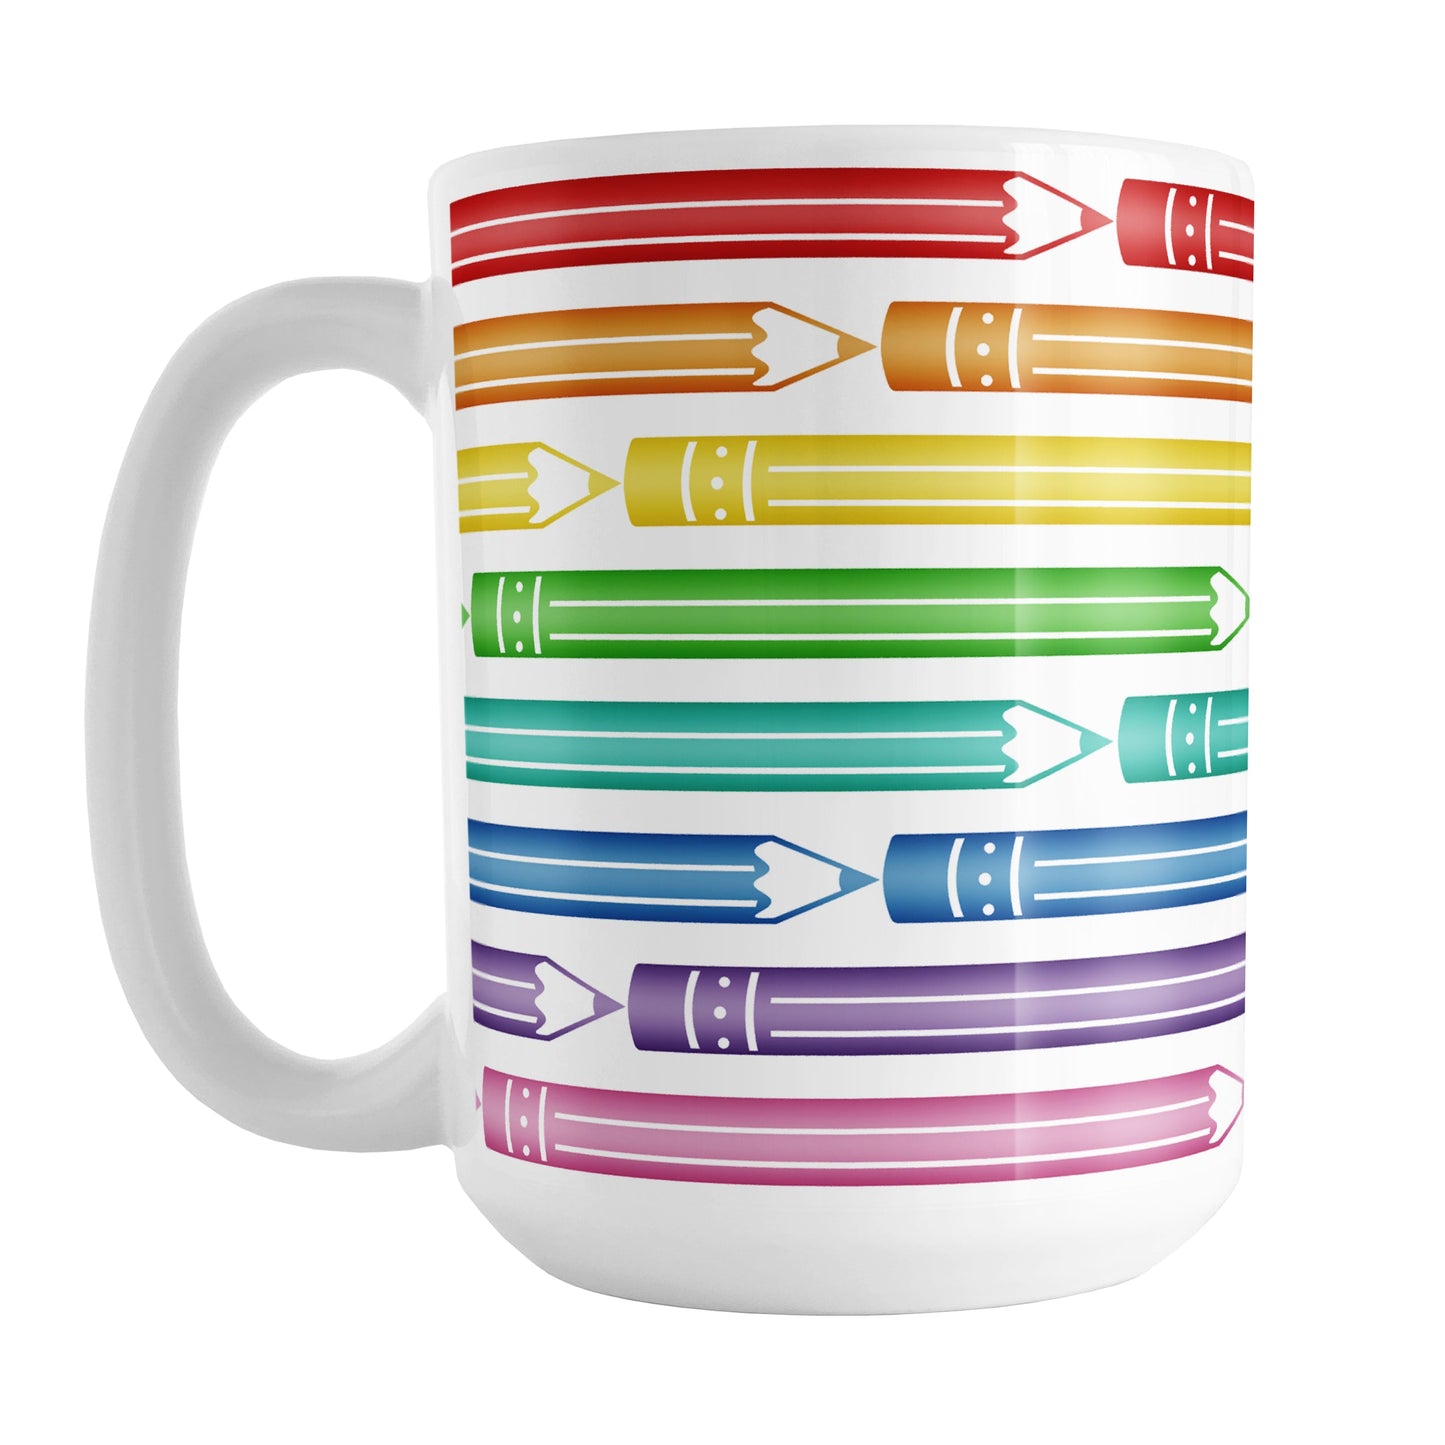 Colored Pencils Pattern Mug (15oz) at Amy's Coffee Mugs. A ceramic coffee mug designed with a pattern of colored pencils in stacked rows, in a rainbow progression, that wraps around the mug to the handle.